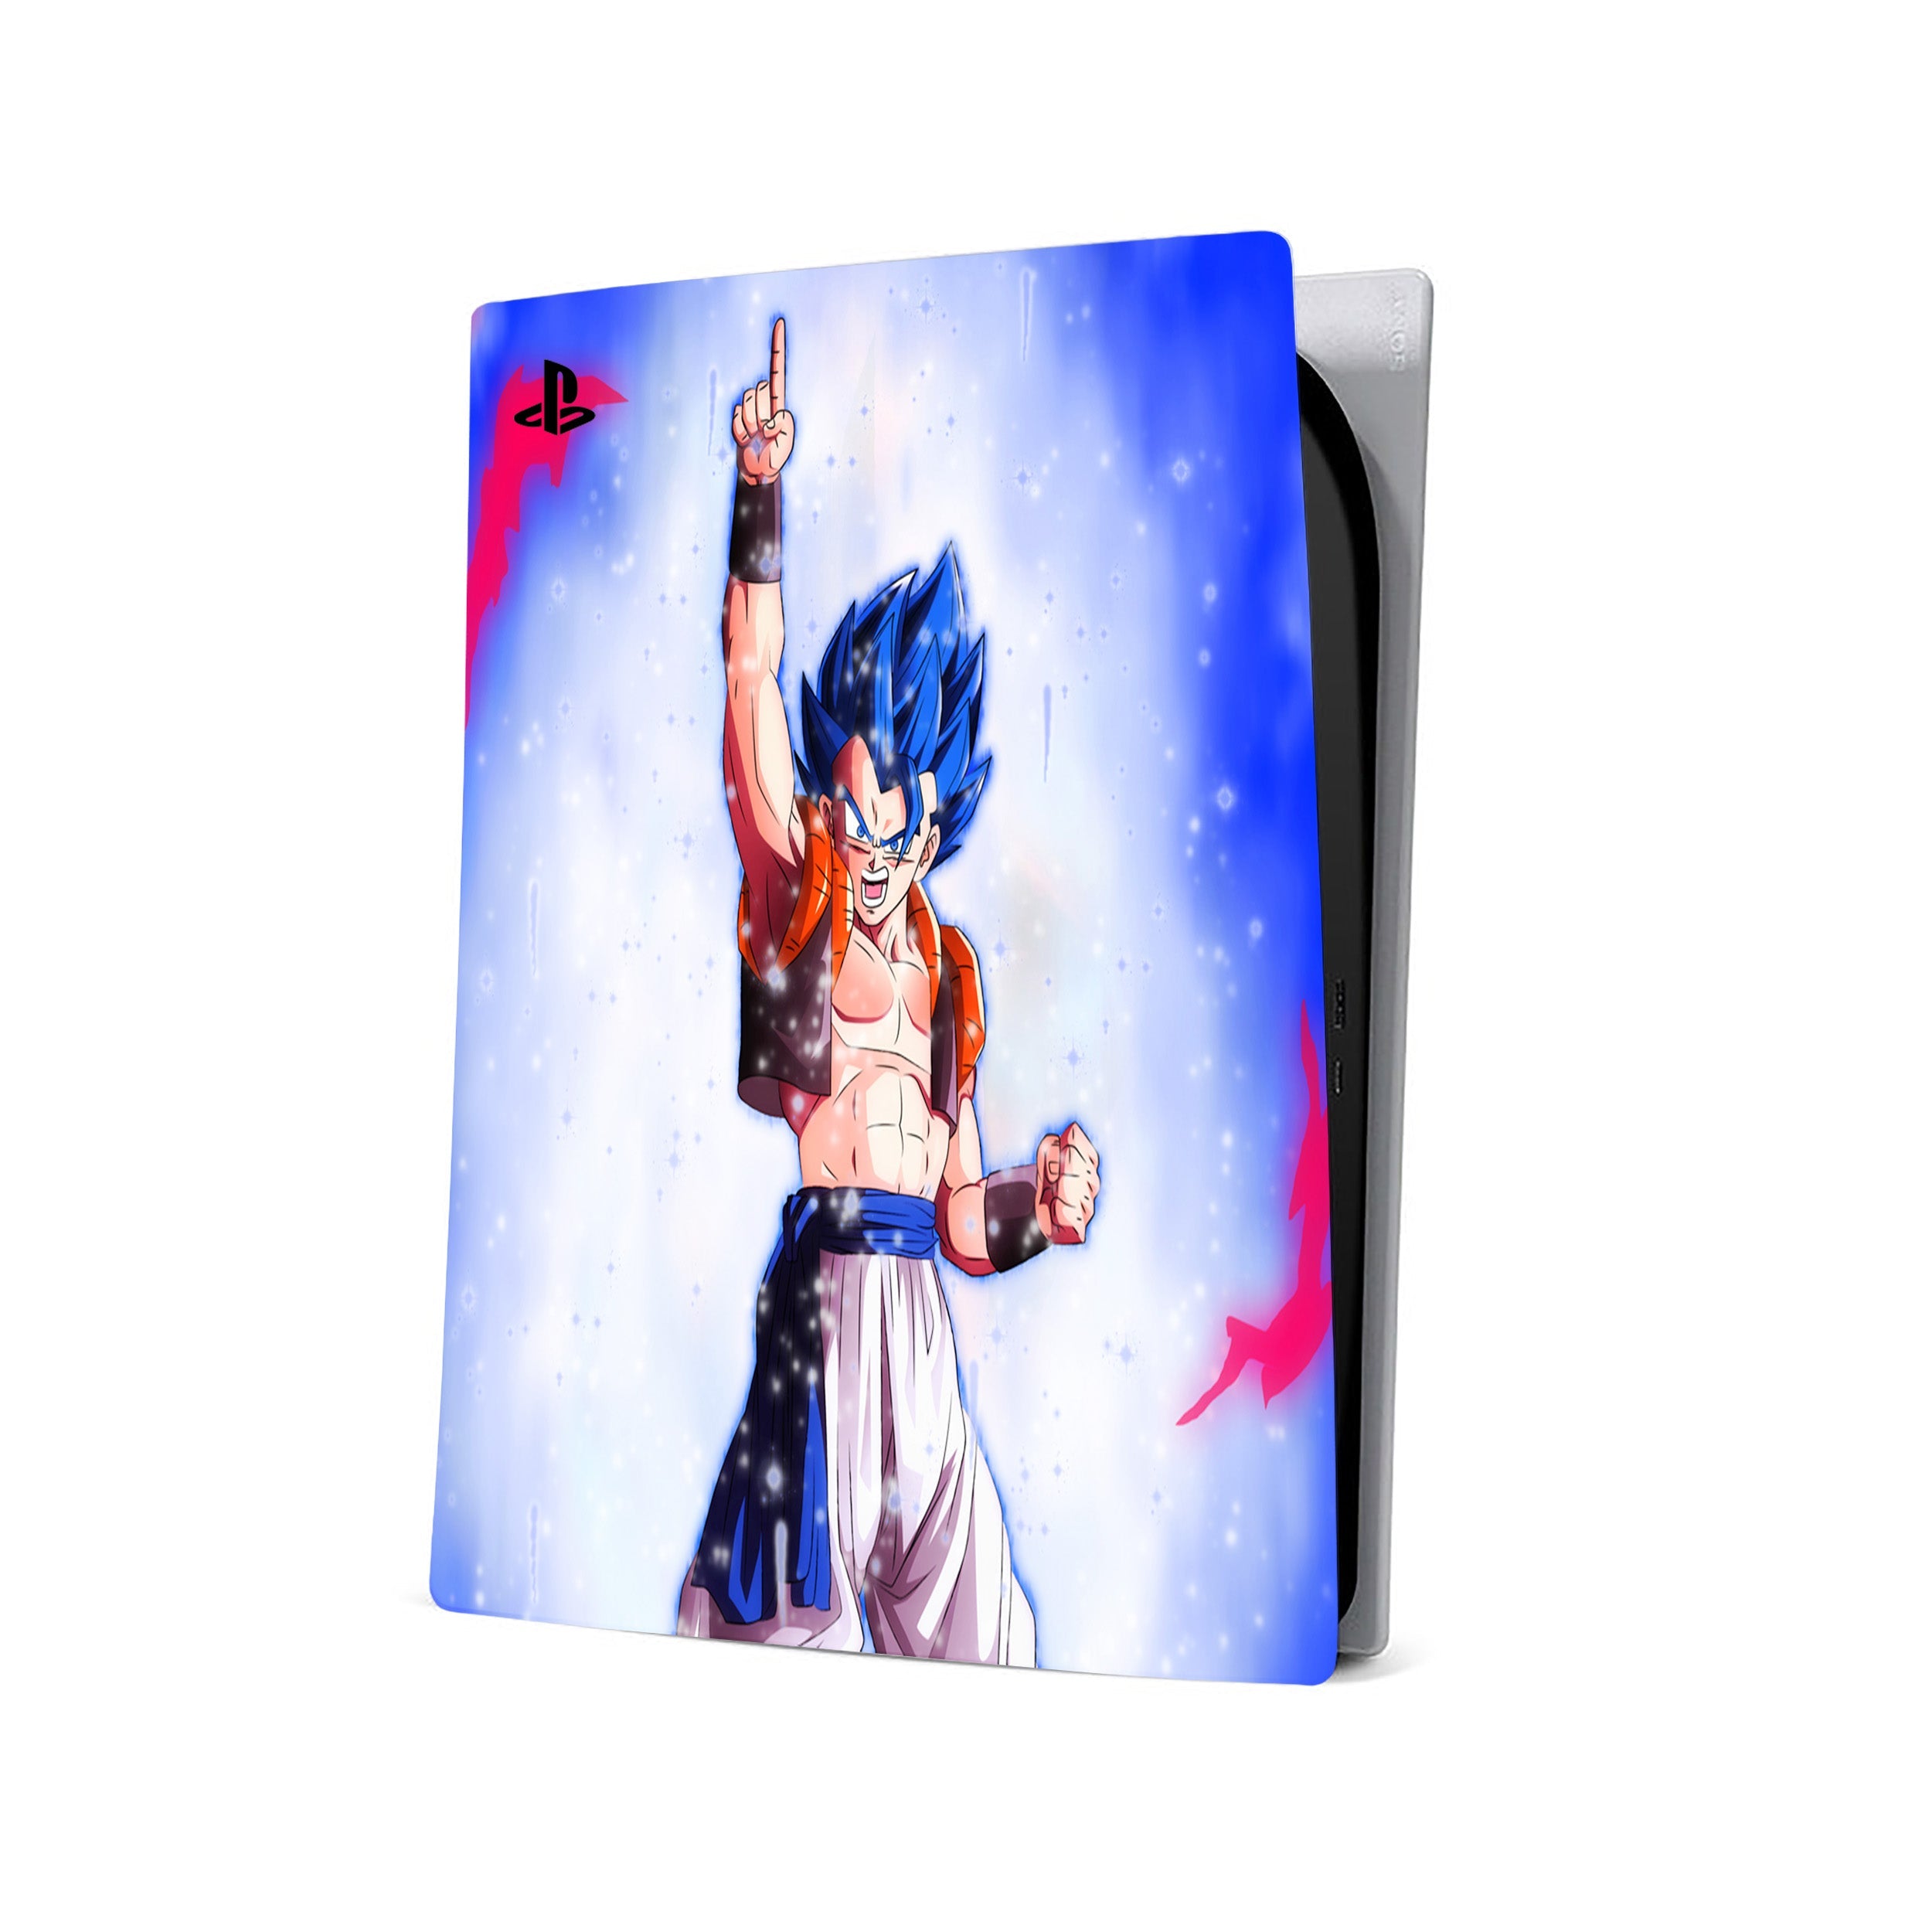 A video game skin featuring a Dragon Ball Super Gogeta design for the PS5.